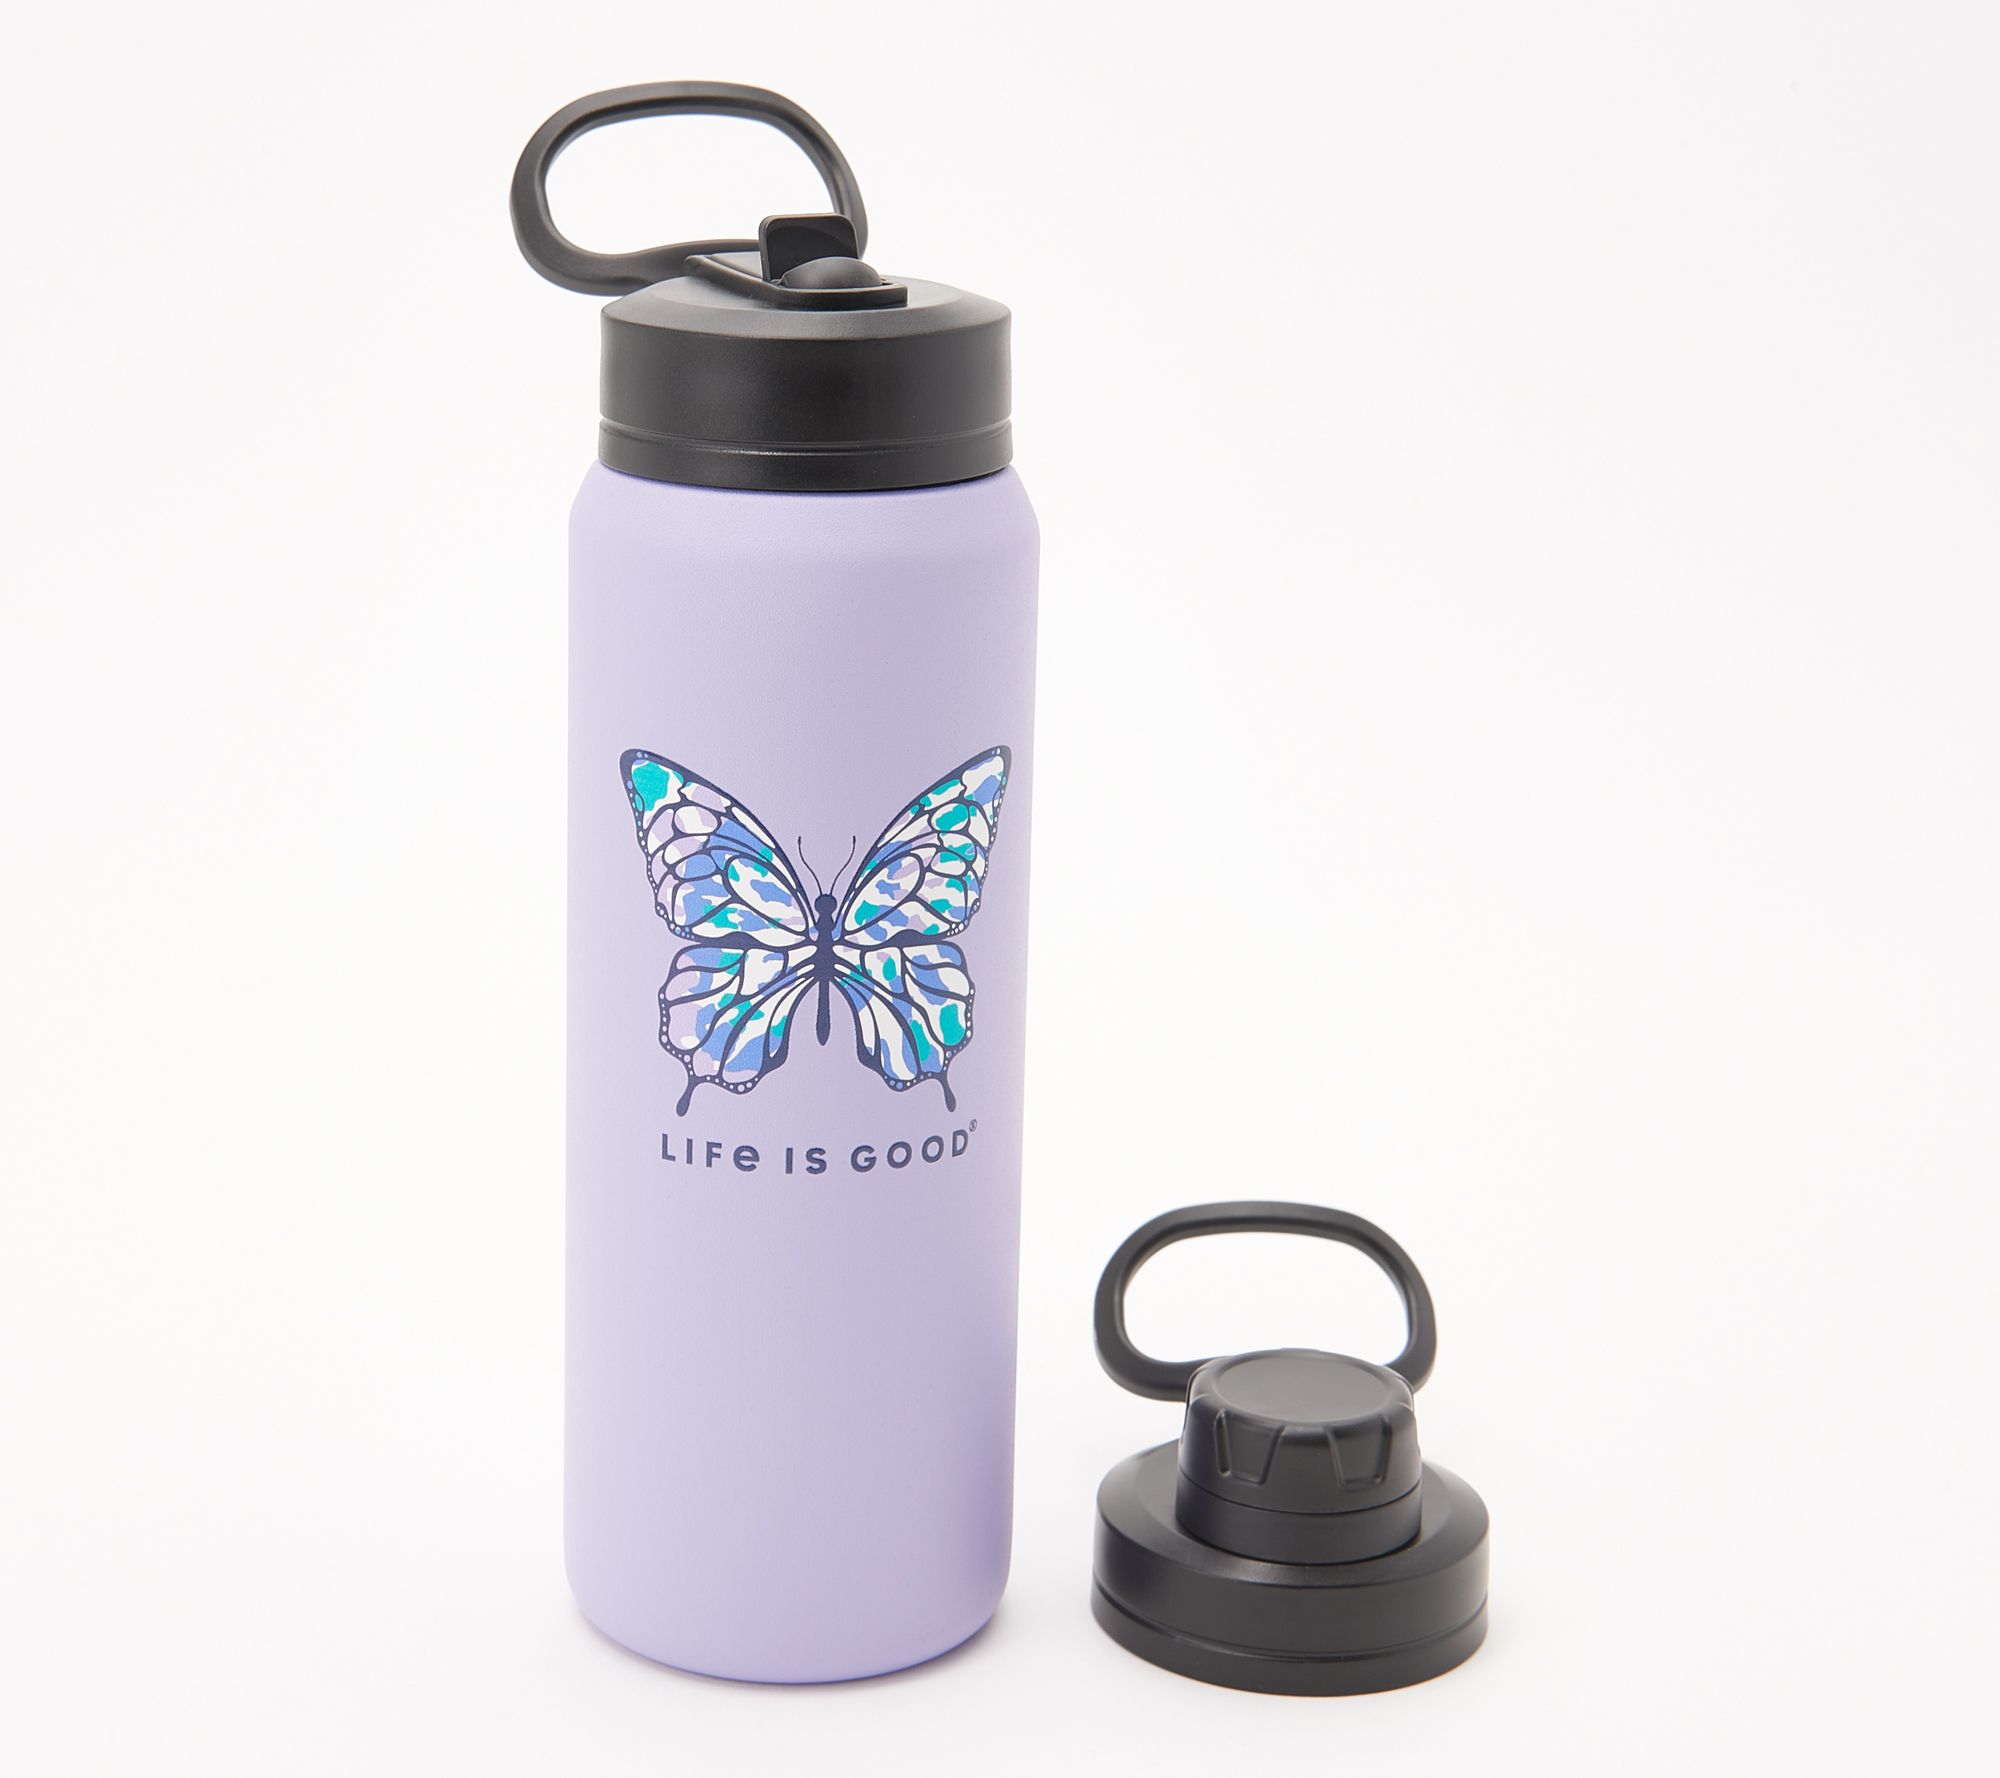 LIFE IS GOOD 32 oz WIDE MOUTH STAINLESS STEEL WATER BOTTLE